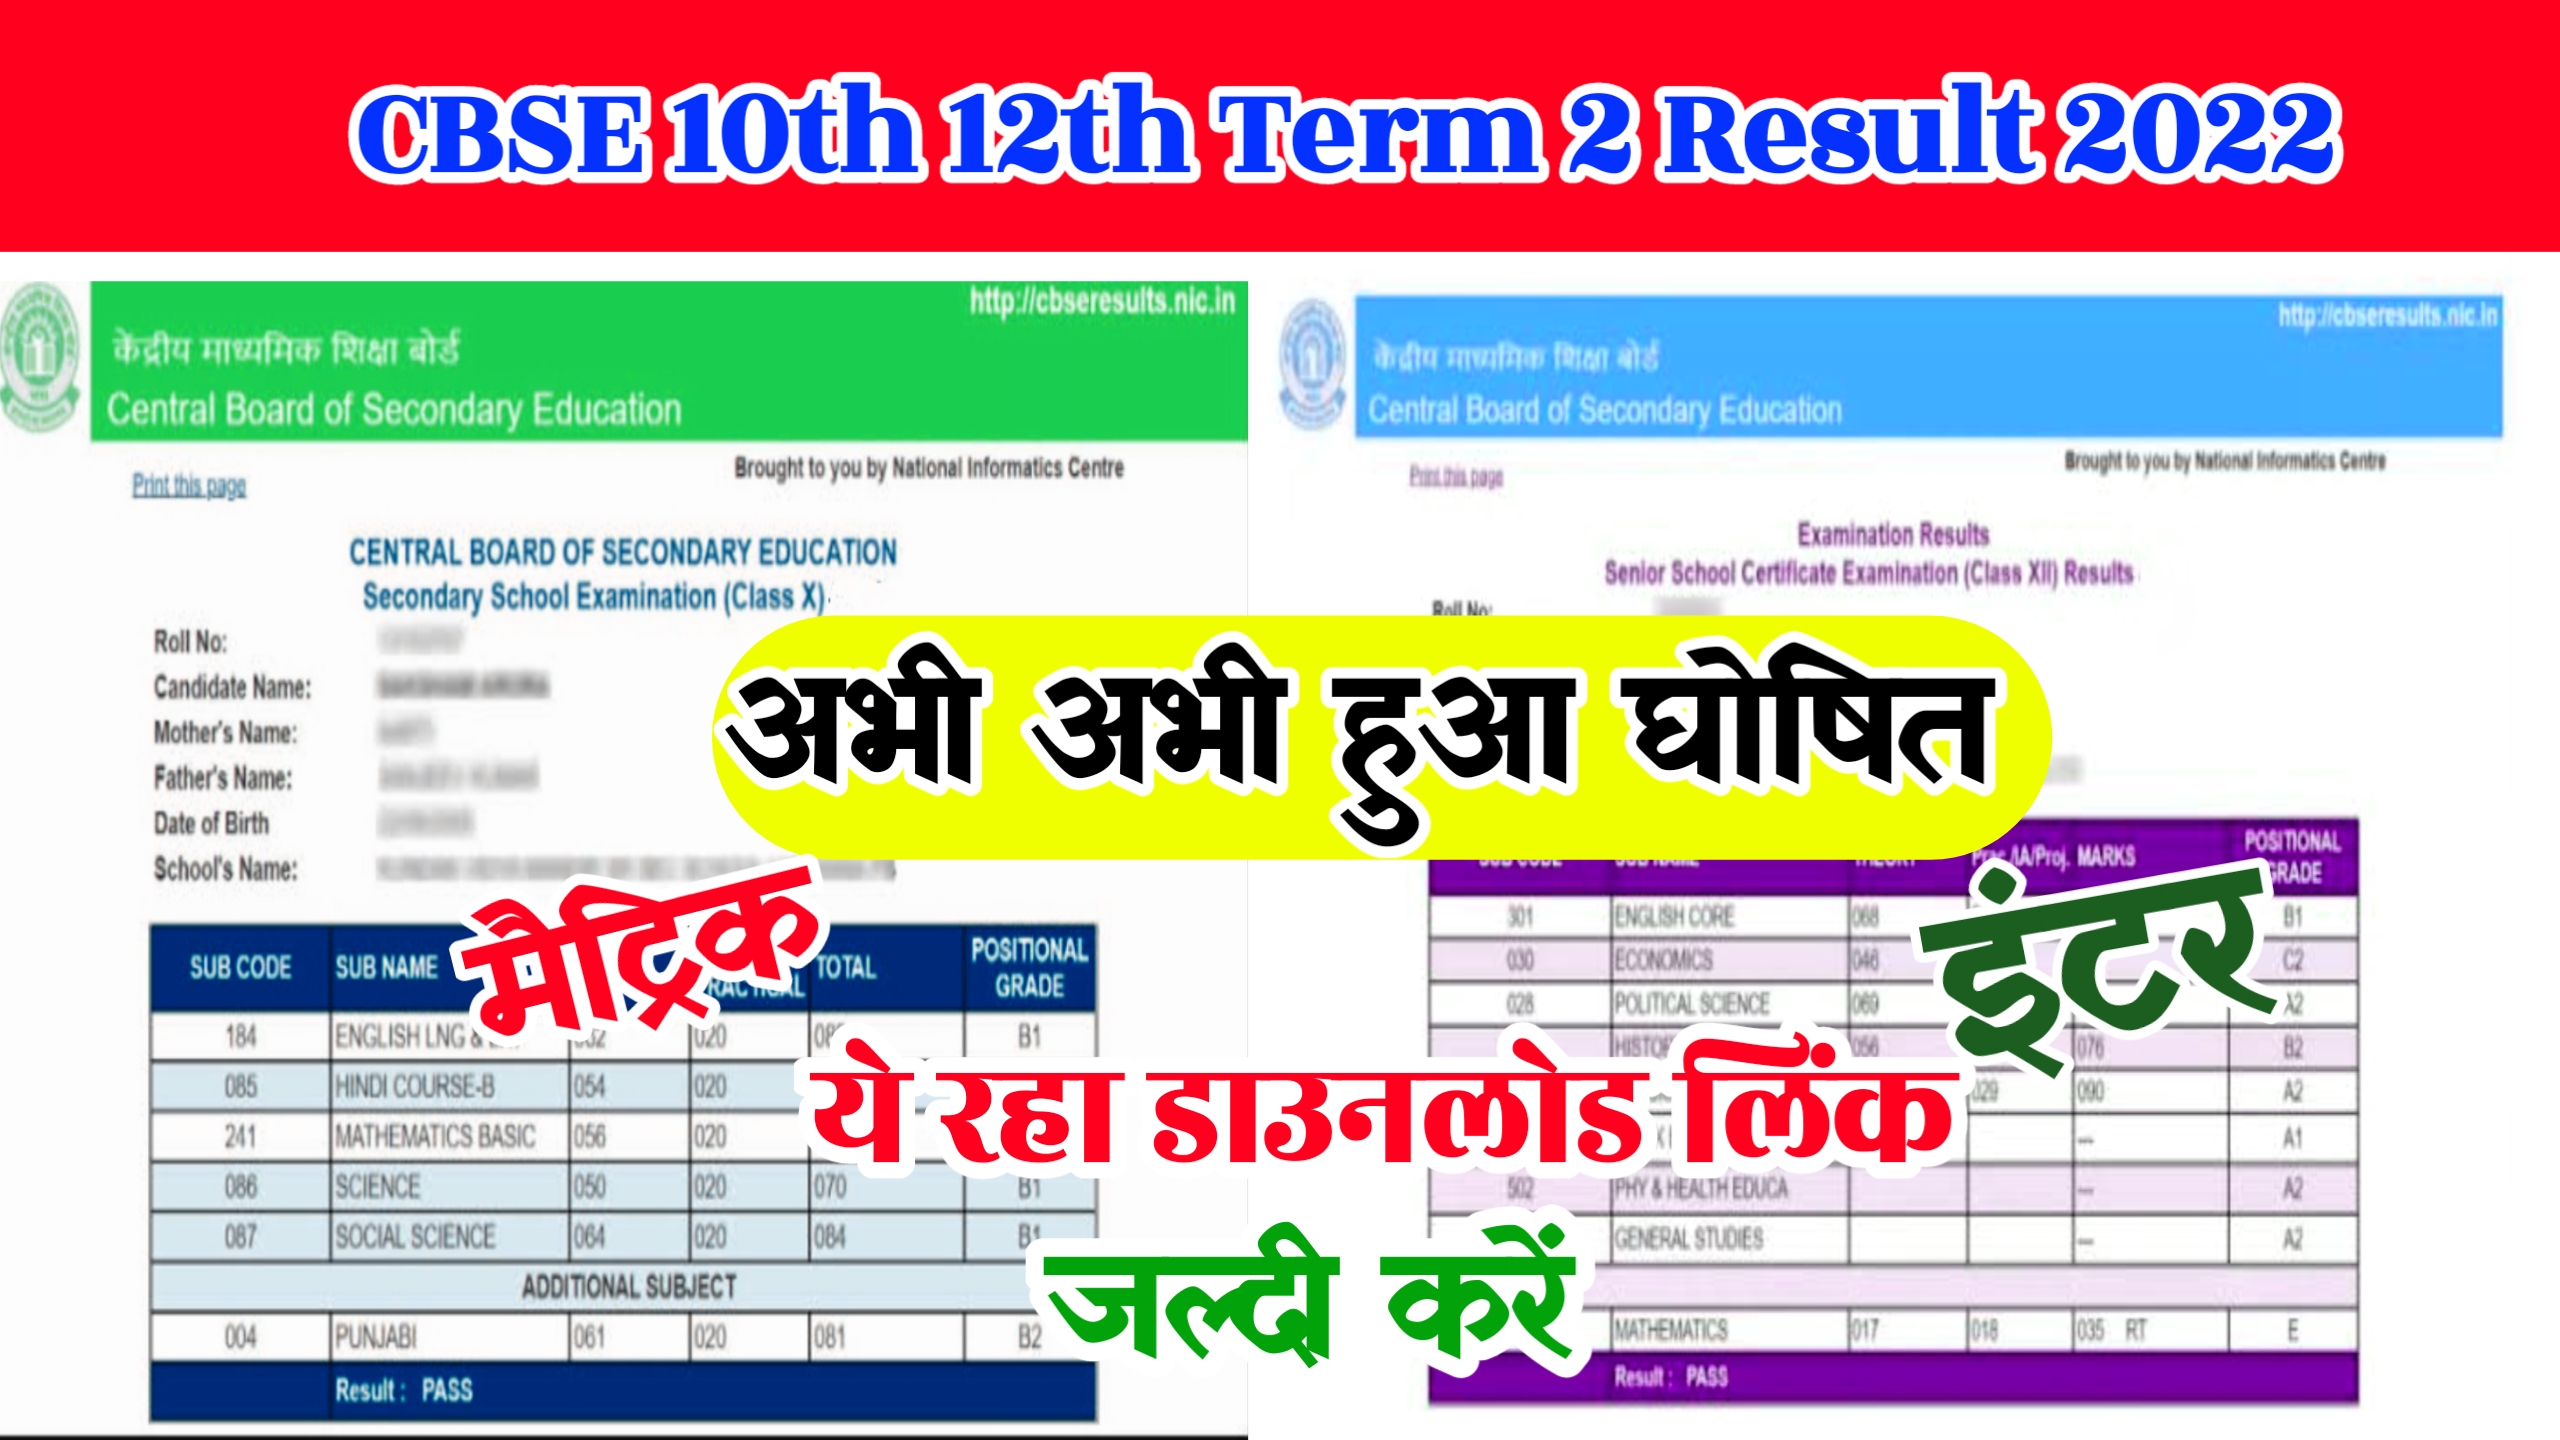 CBSE 10th 12th Result 2022 Declared Today : Marksheet @cbseresults.nic.in